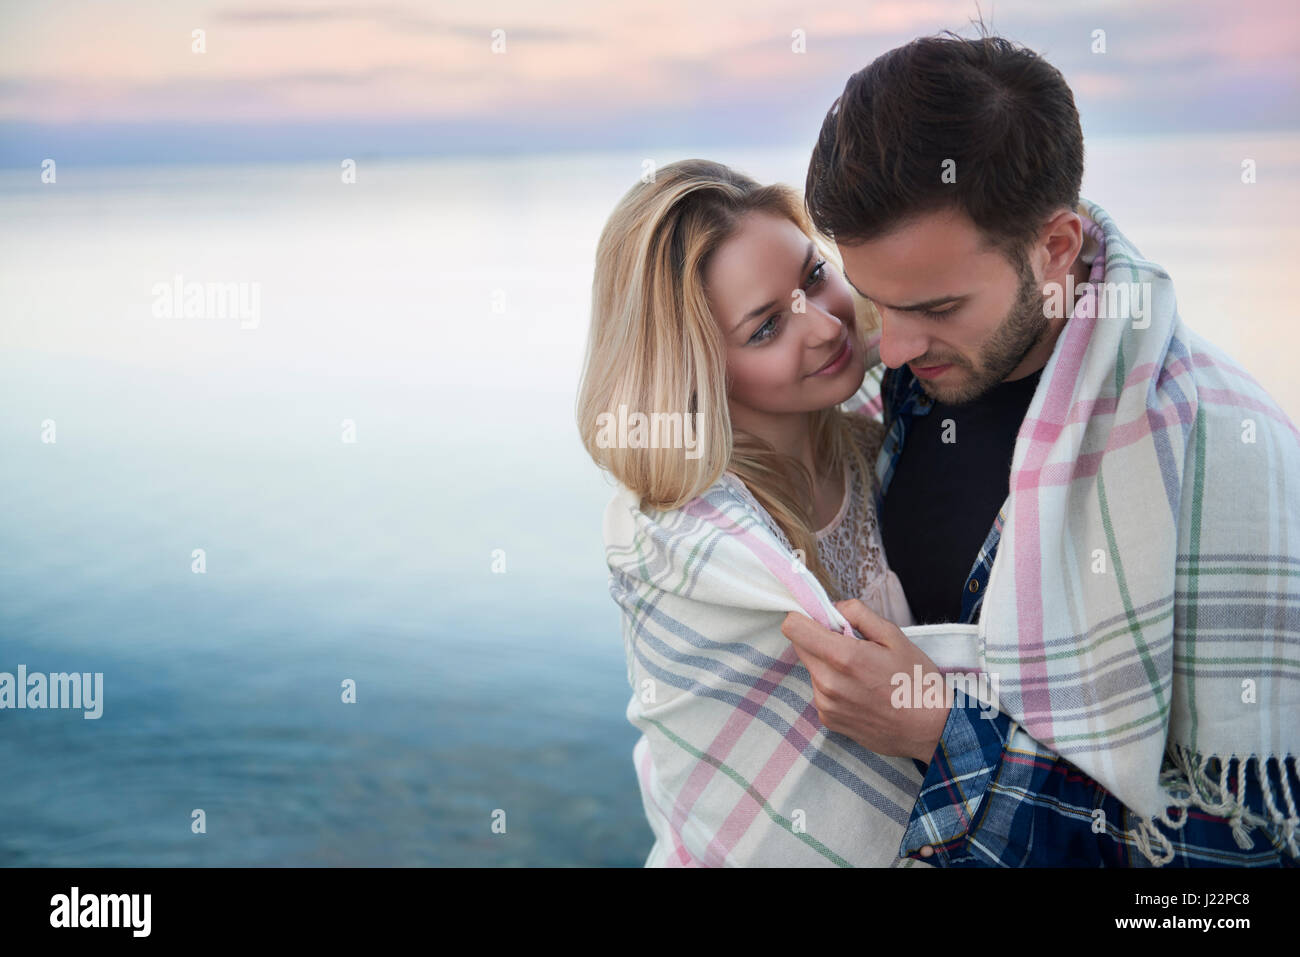 True soulmate and big love Stock Photo